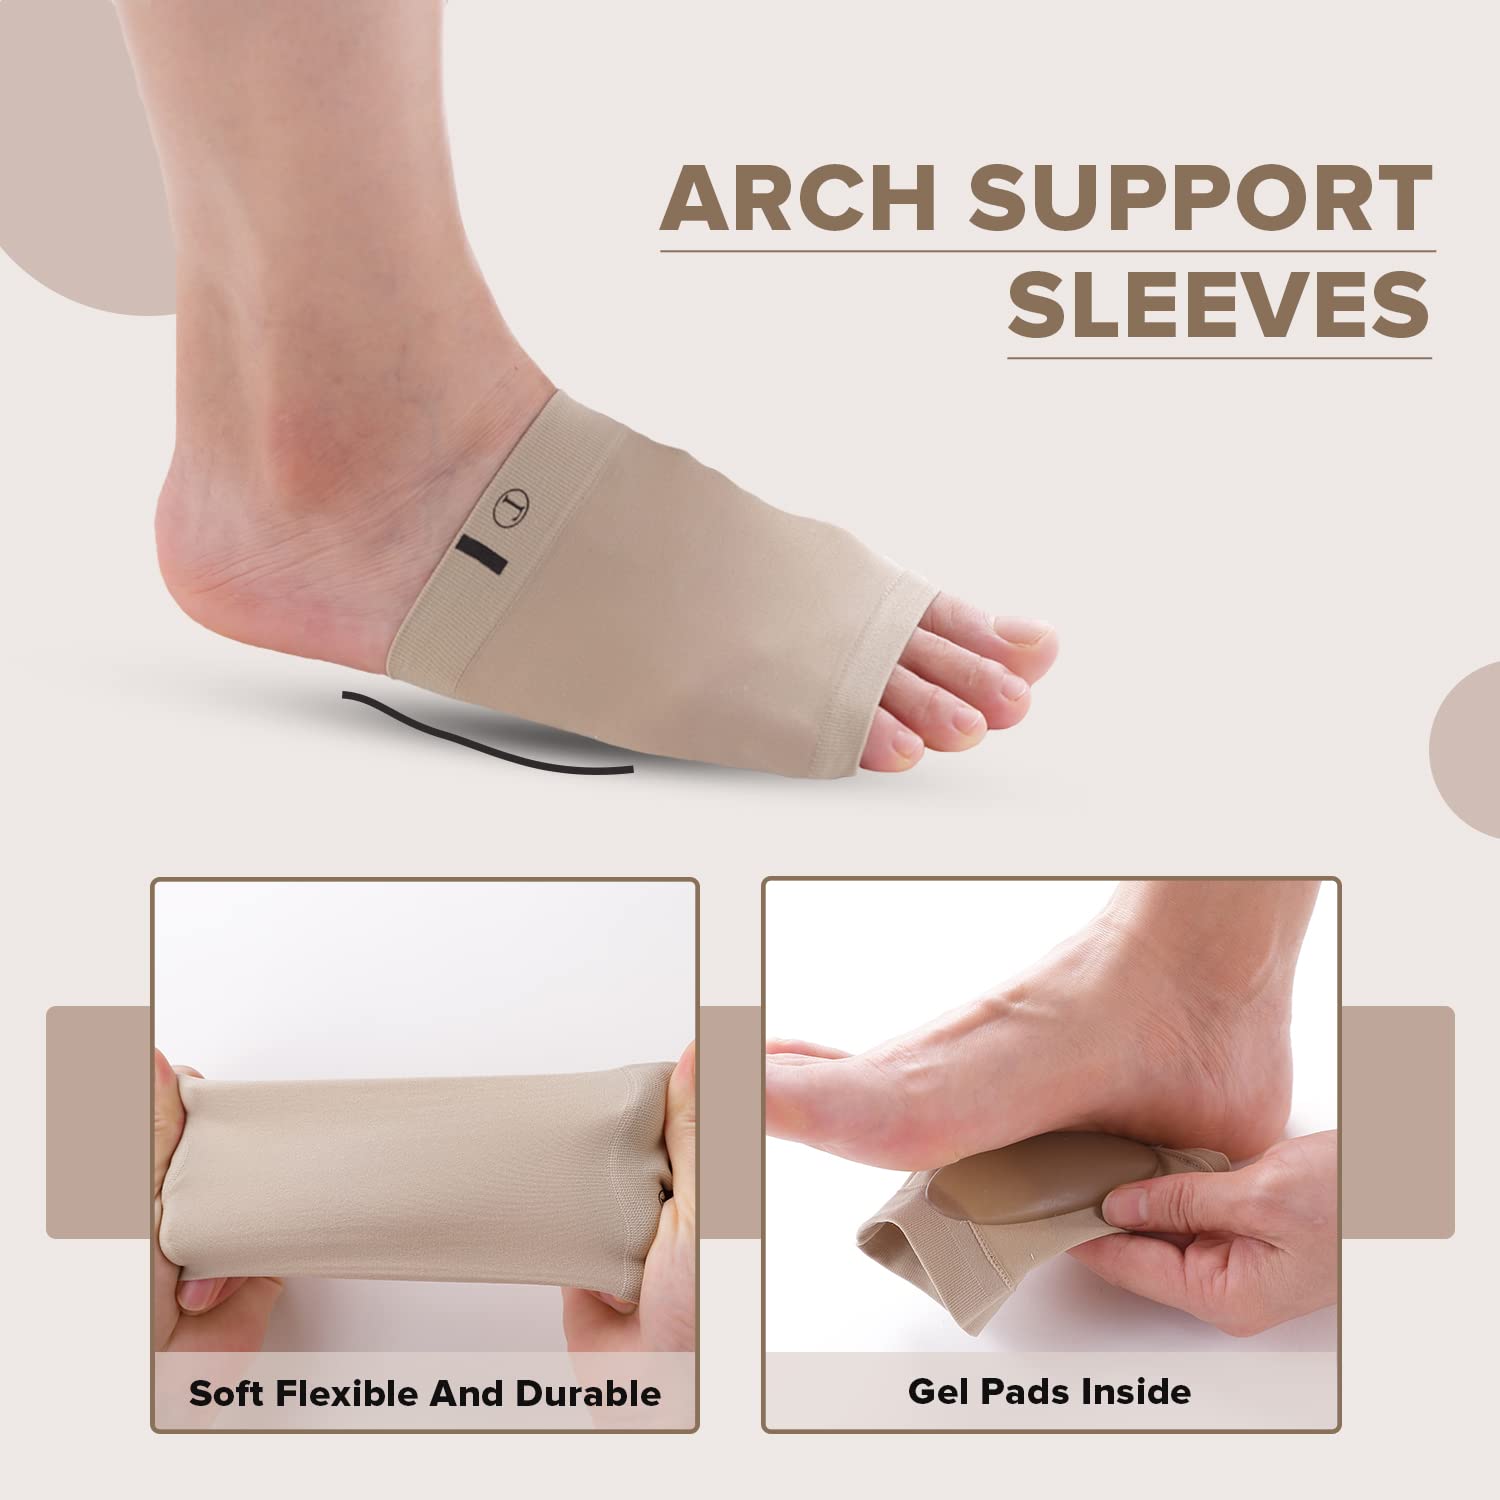 Dr Foot Arch Support Sleeve Cushion | For Plantar Fasciitis, Foot Pain, Muscle Relaxation, Fallen Arches | For Men & Women | Free Size With Beige Color -1 Pair (Pack of 5)